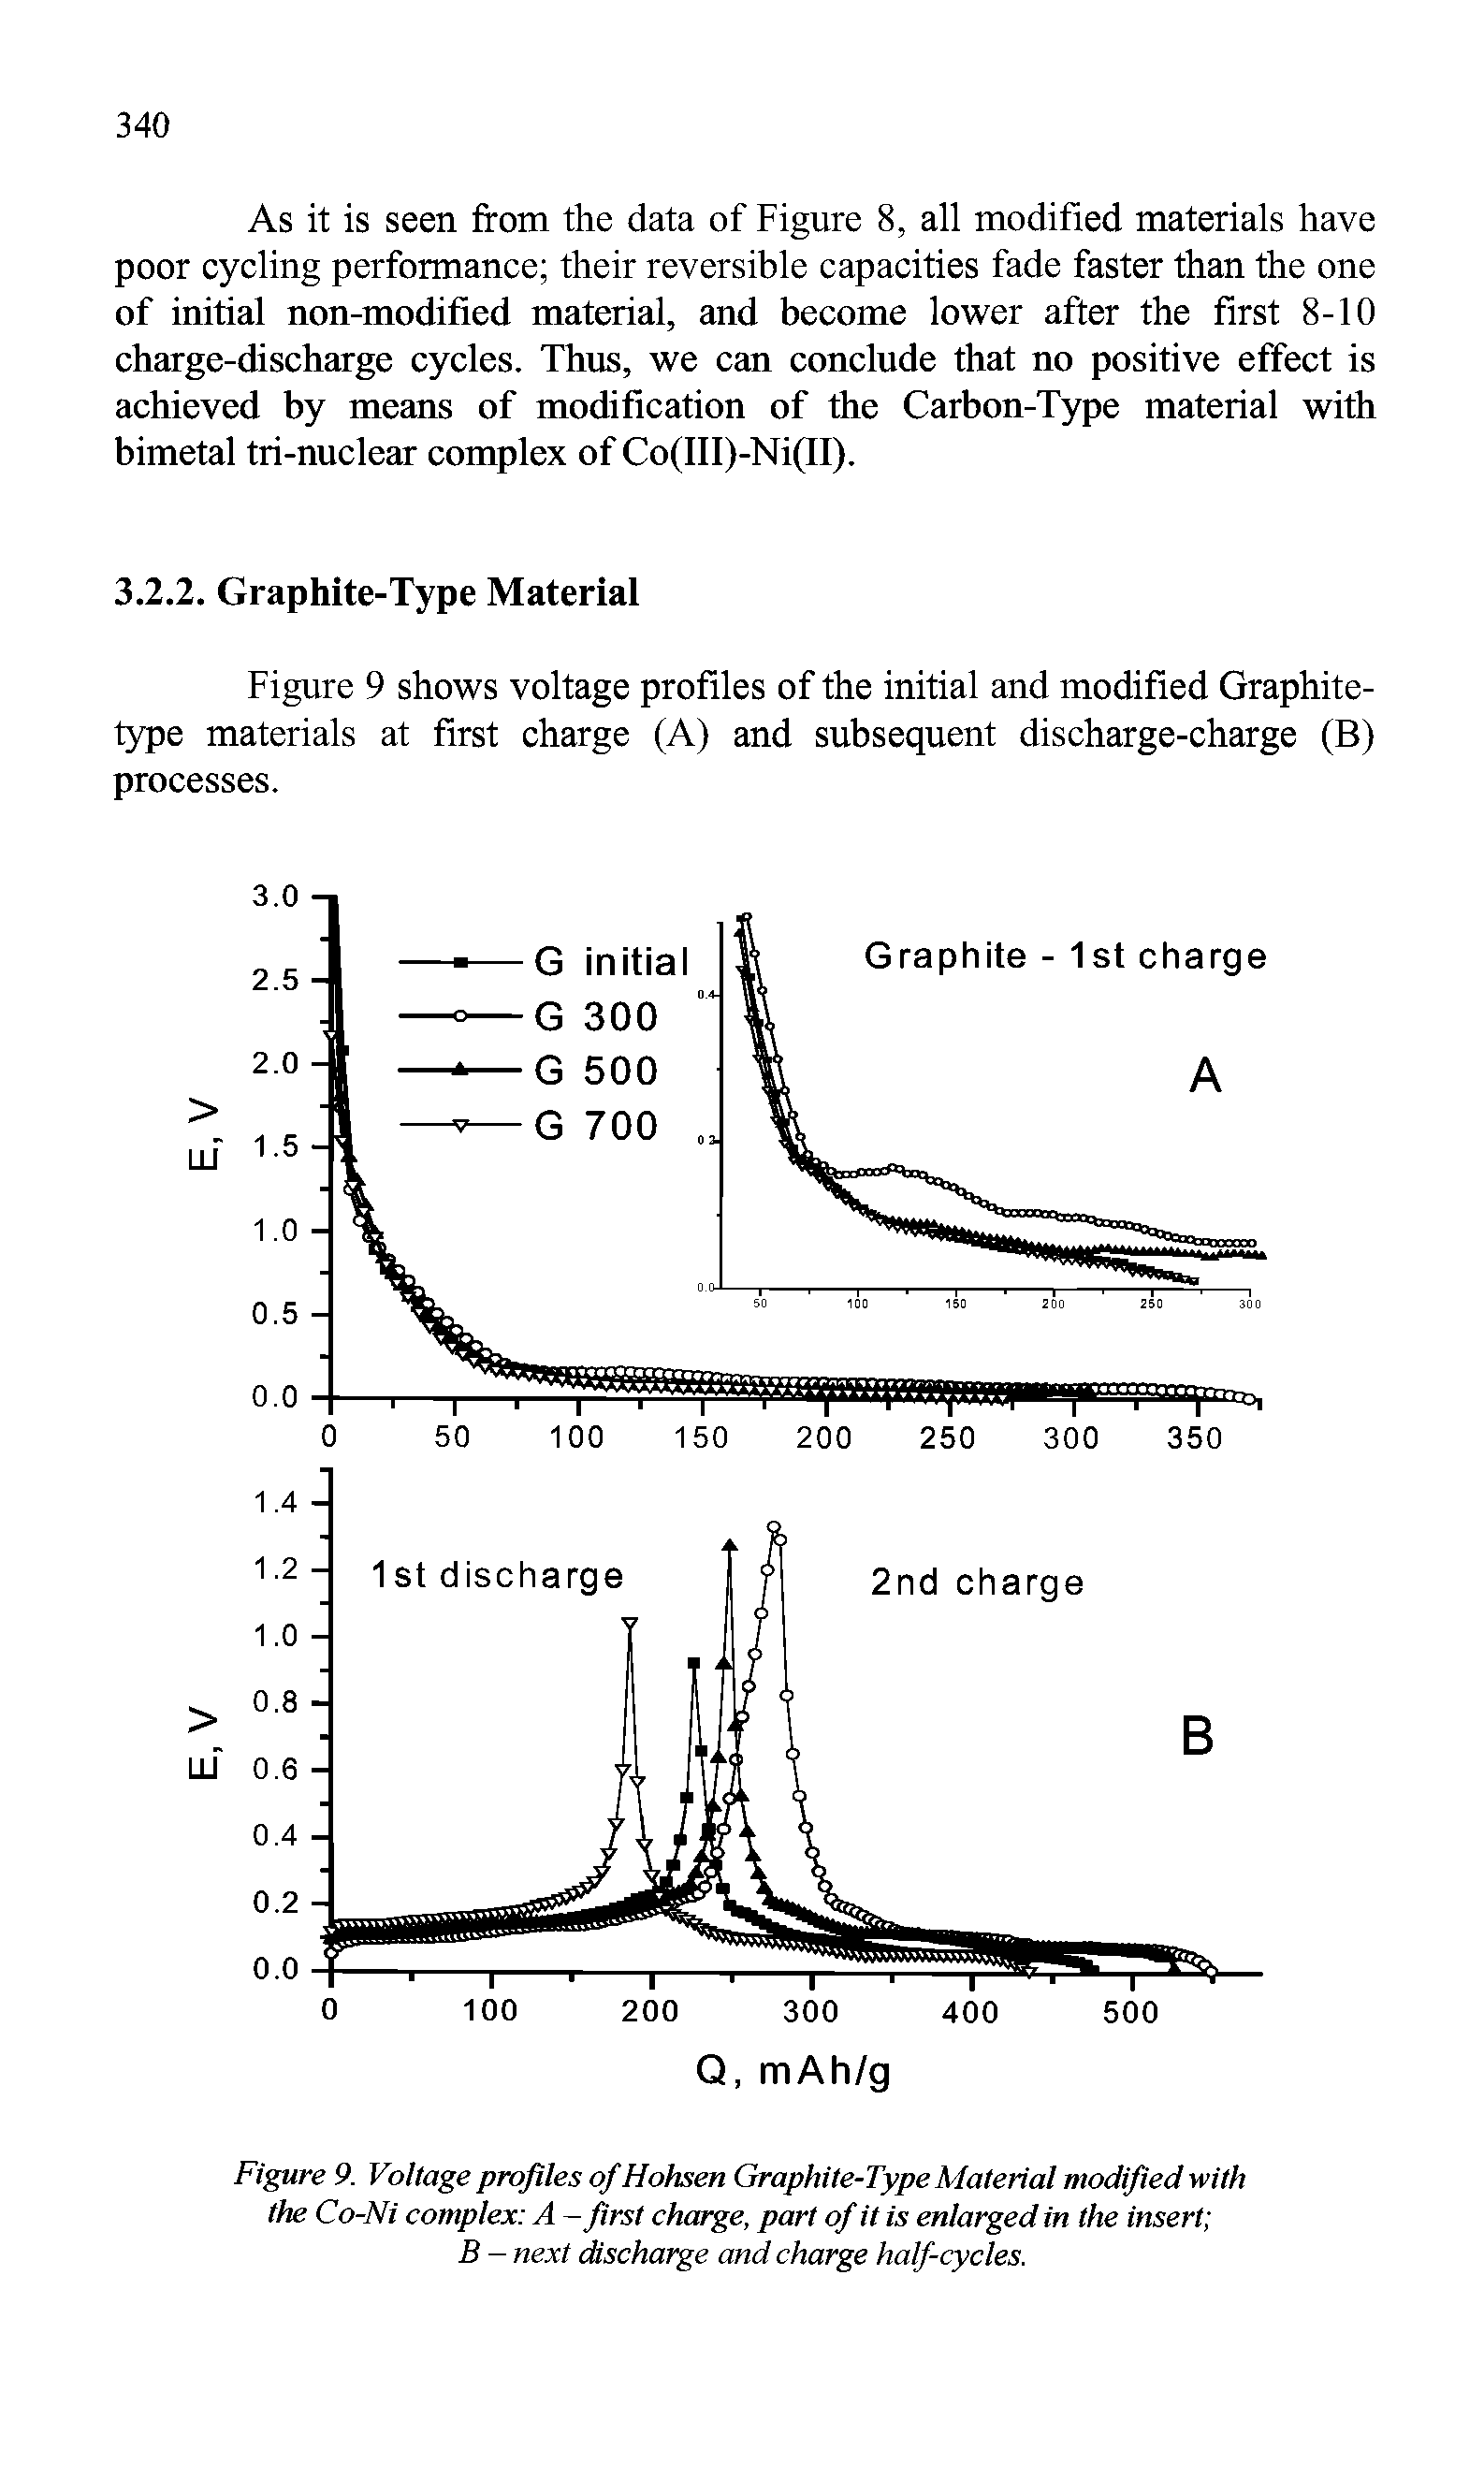 Figure 9. Voltage profiles of Hohsen Graphite-Type Material modified with the Co-Ni complex A -first charge, part of it is enlarged in the insert ...